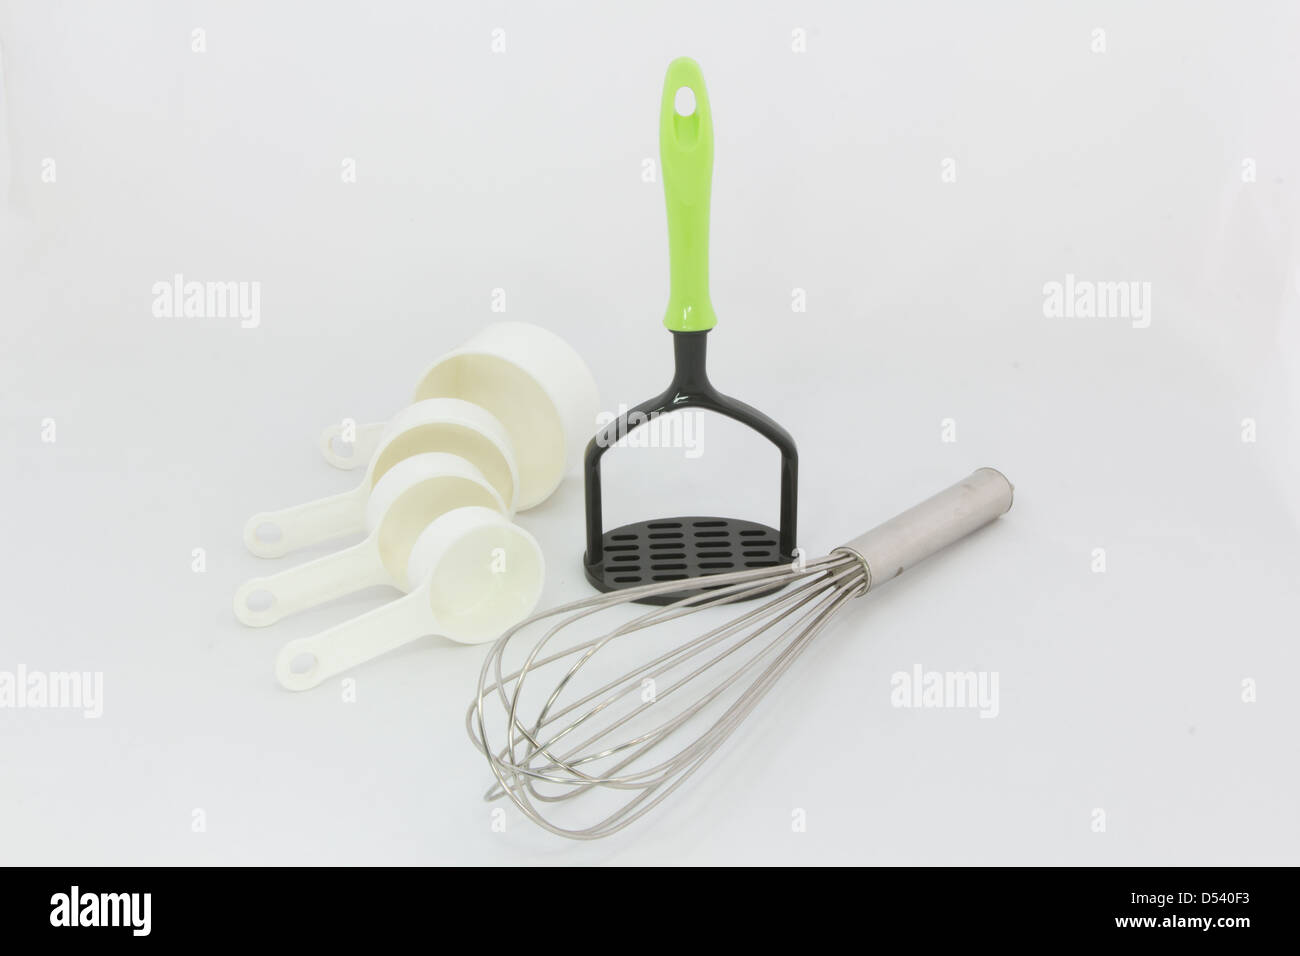 A group of kitchen tools Stock Photo